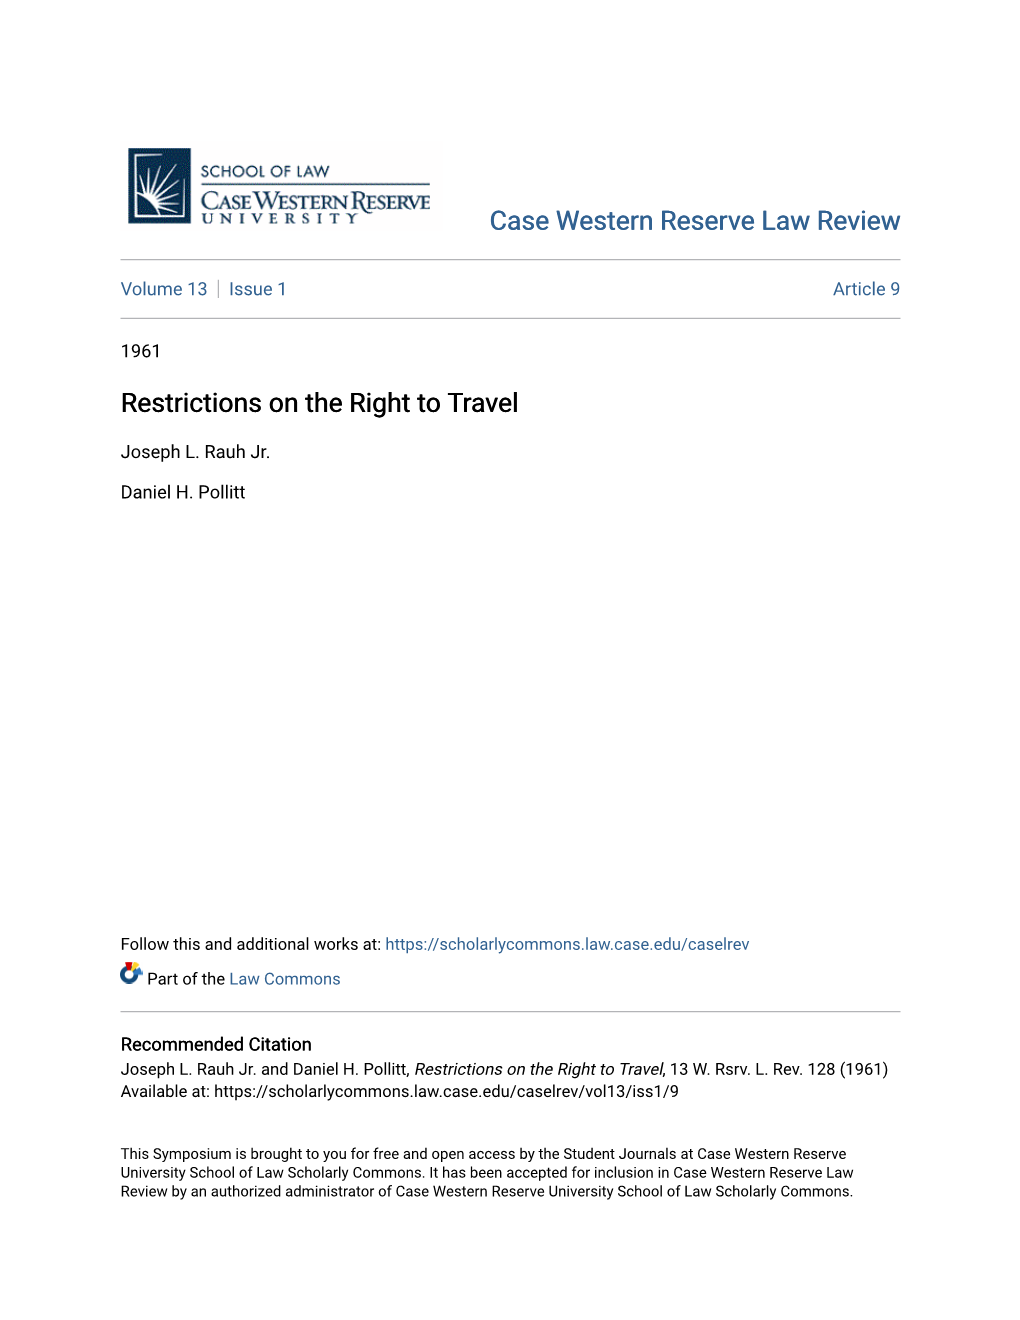 Restrictions on the Right to Travel